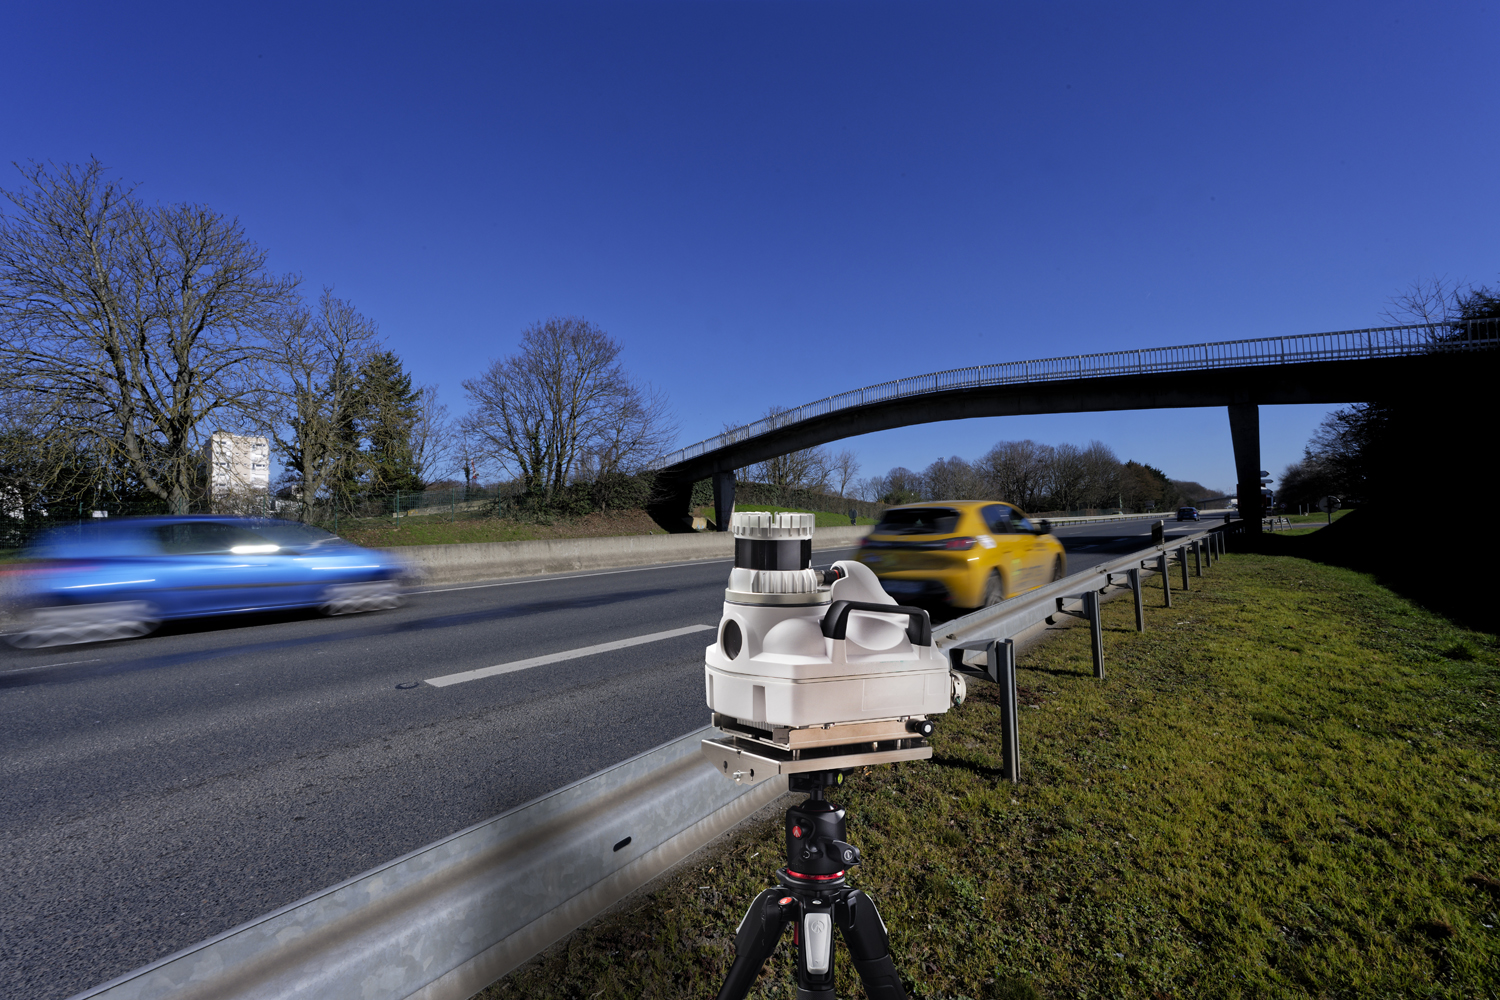 [PRESS RELEASE] PARIFEX 3D-LiDAR Speed Cameras are Awarded Triple Certification